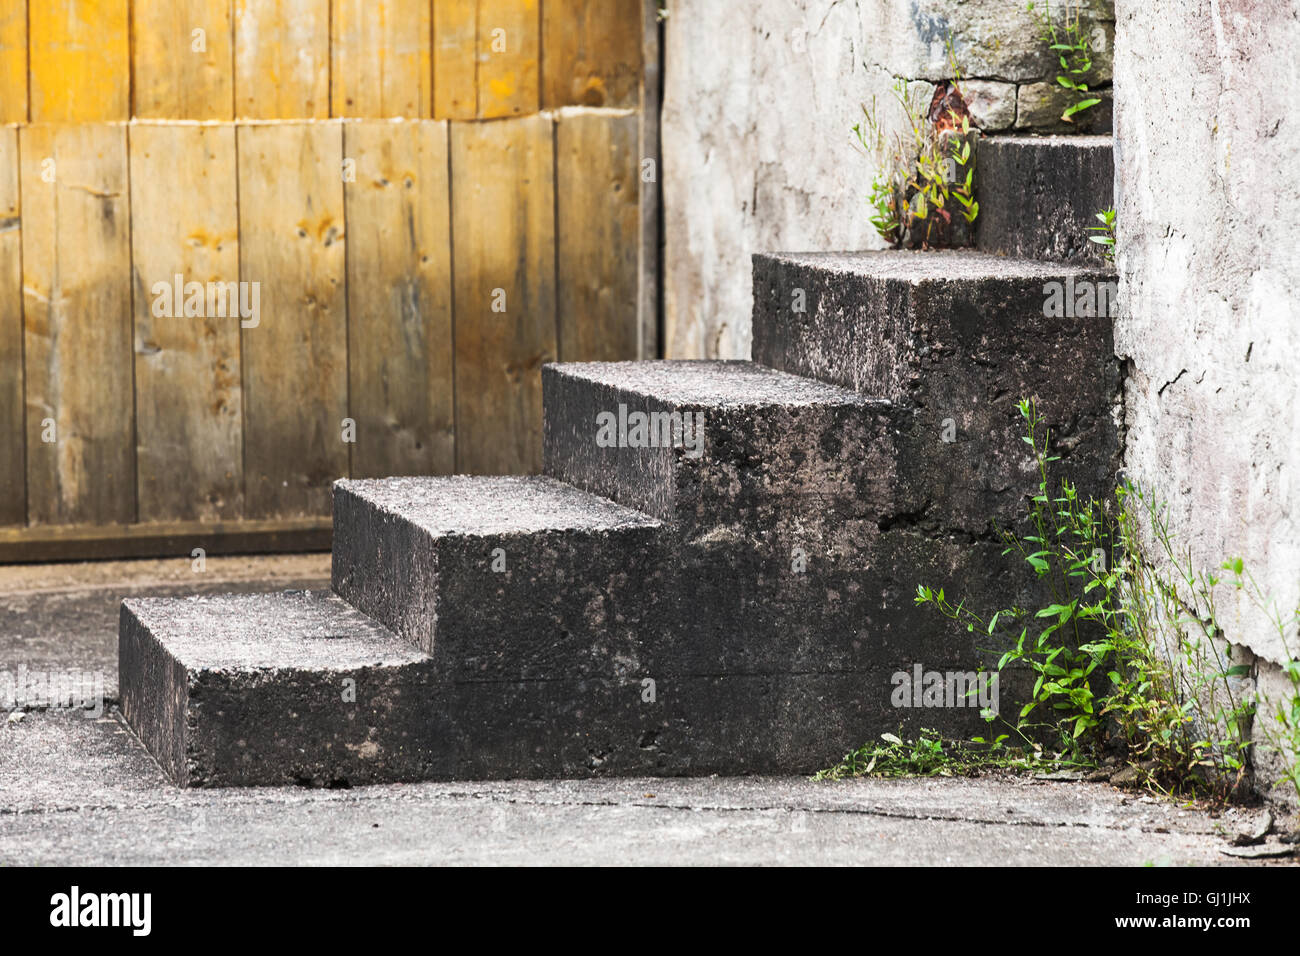 Abstract rural architecture fragment, old concrete stairs near wooden wall Stock Photo